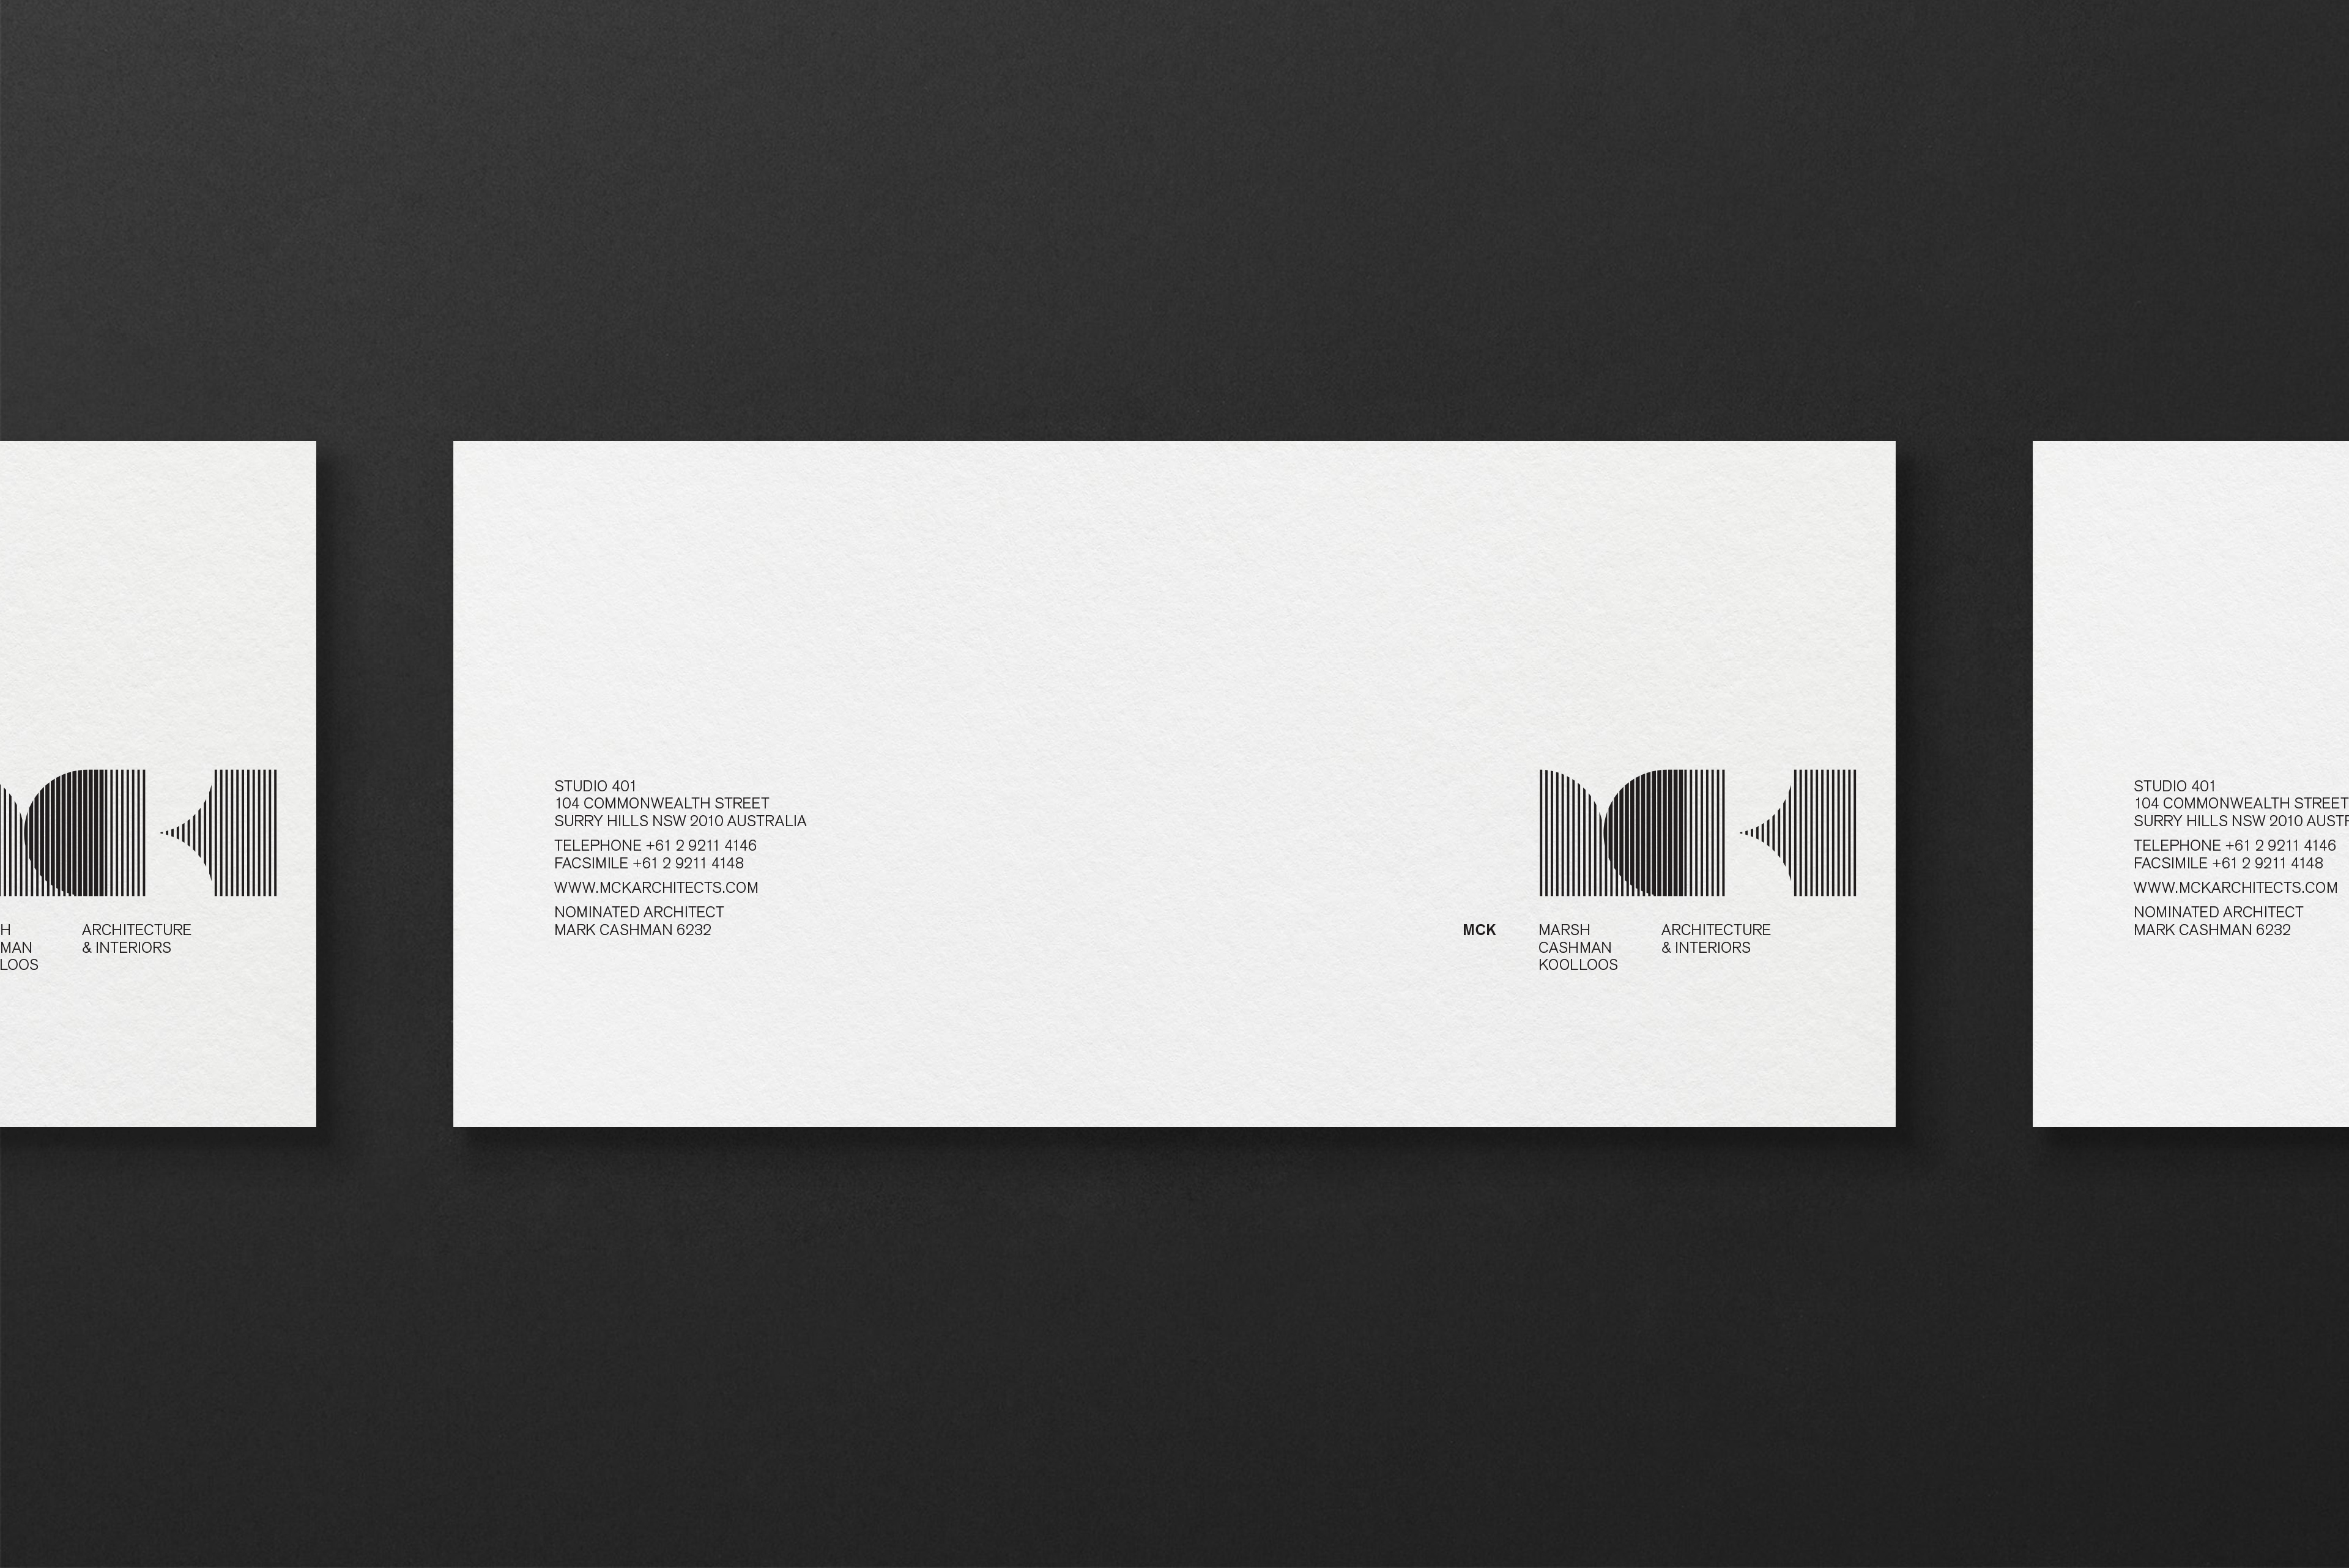 Logo and compliment slip designed by There for Sydney based architectural firm MCK